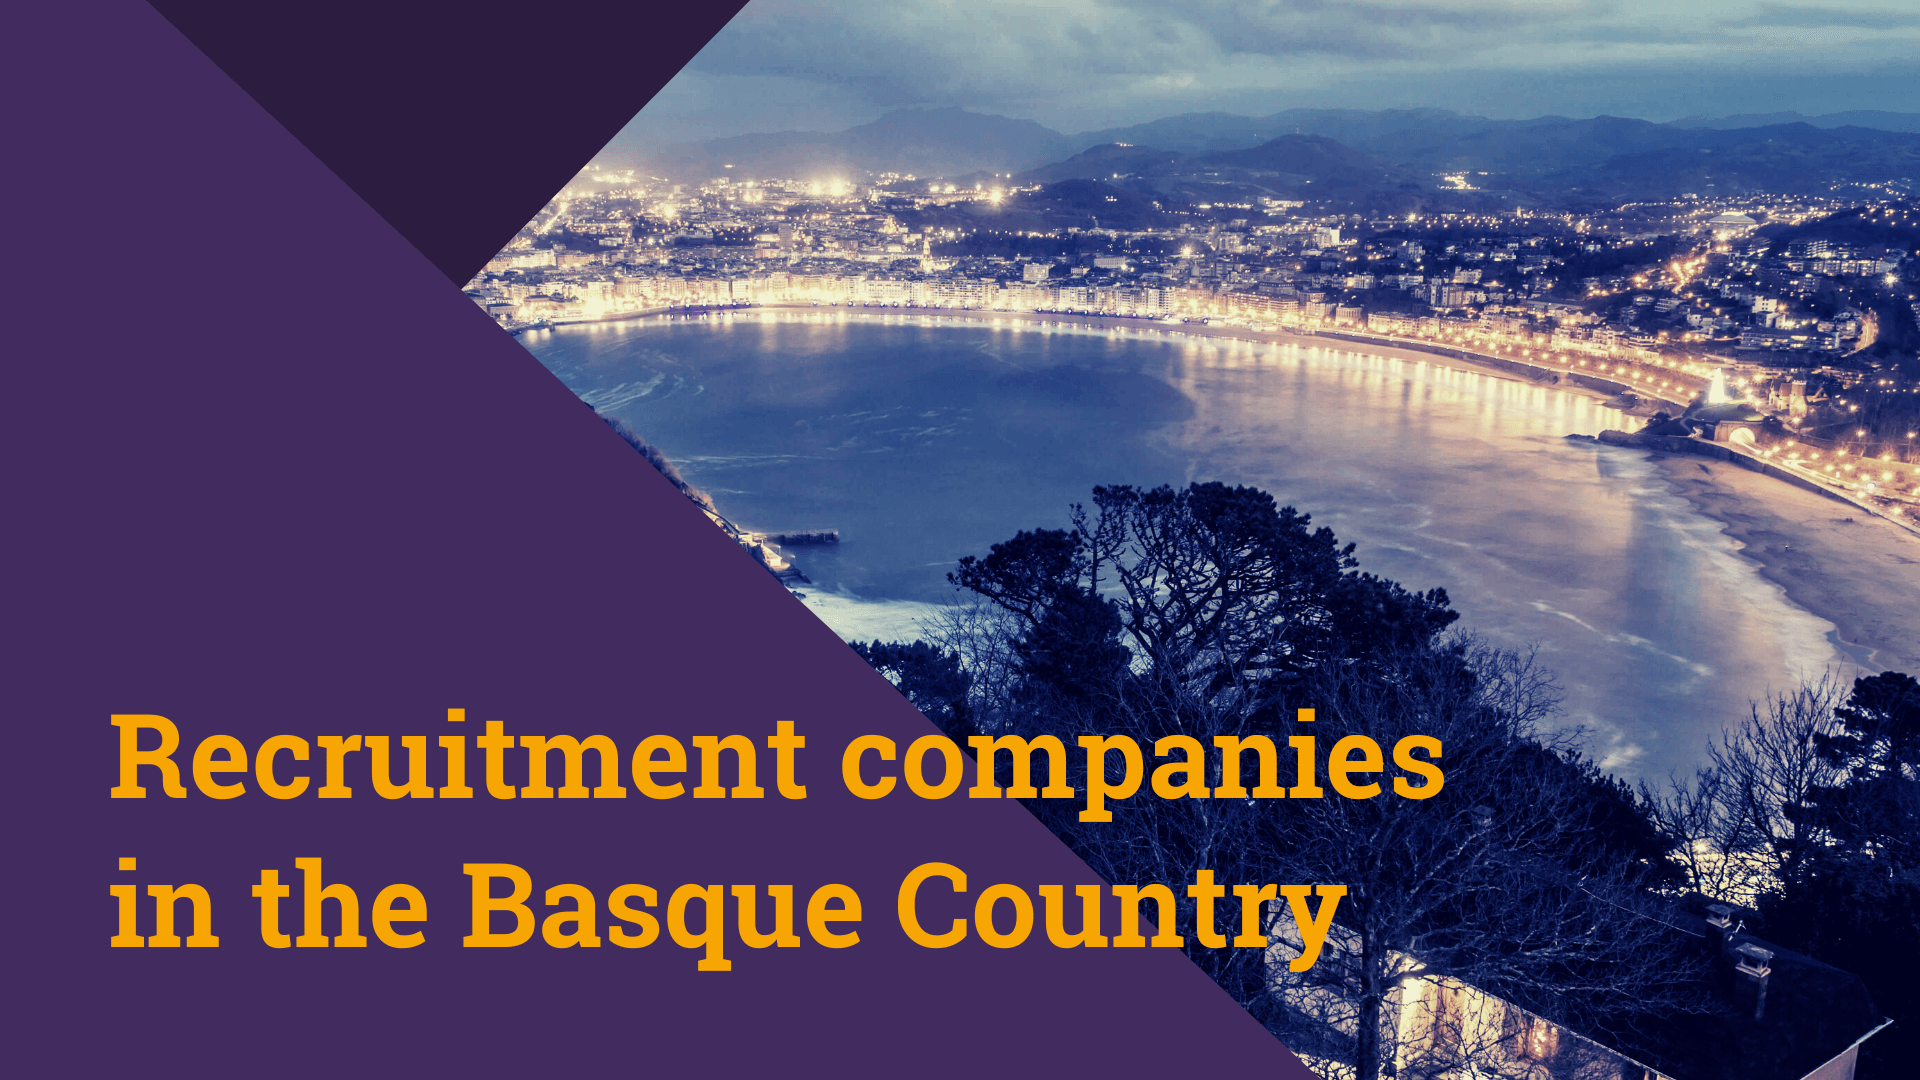 Recruitment companies in the Basque Country